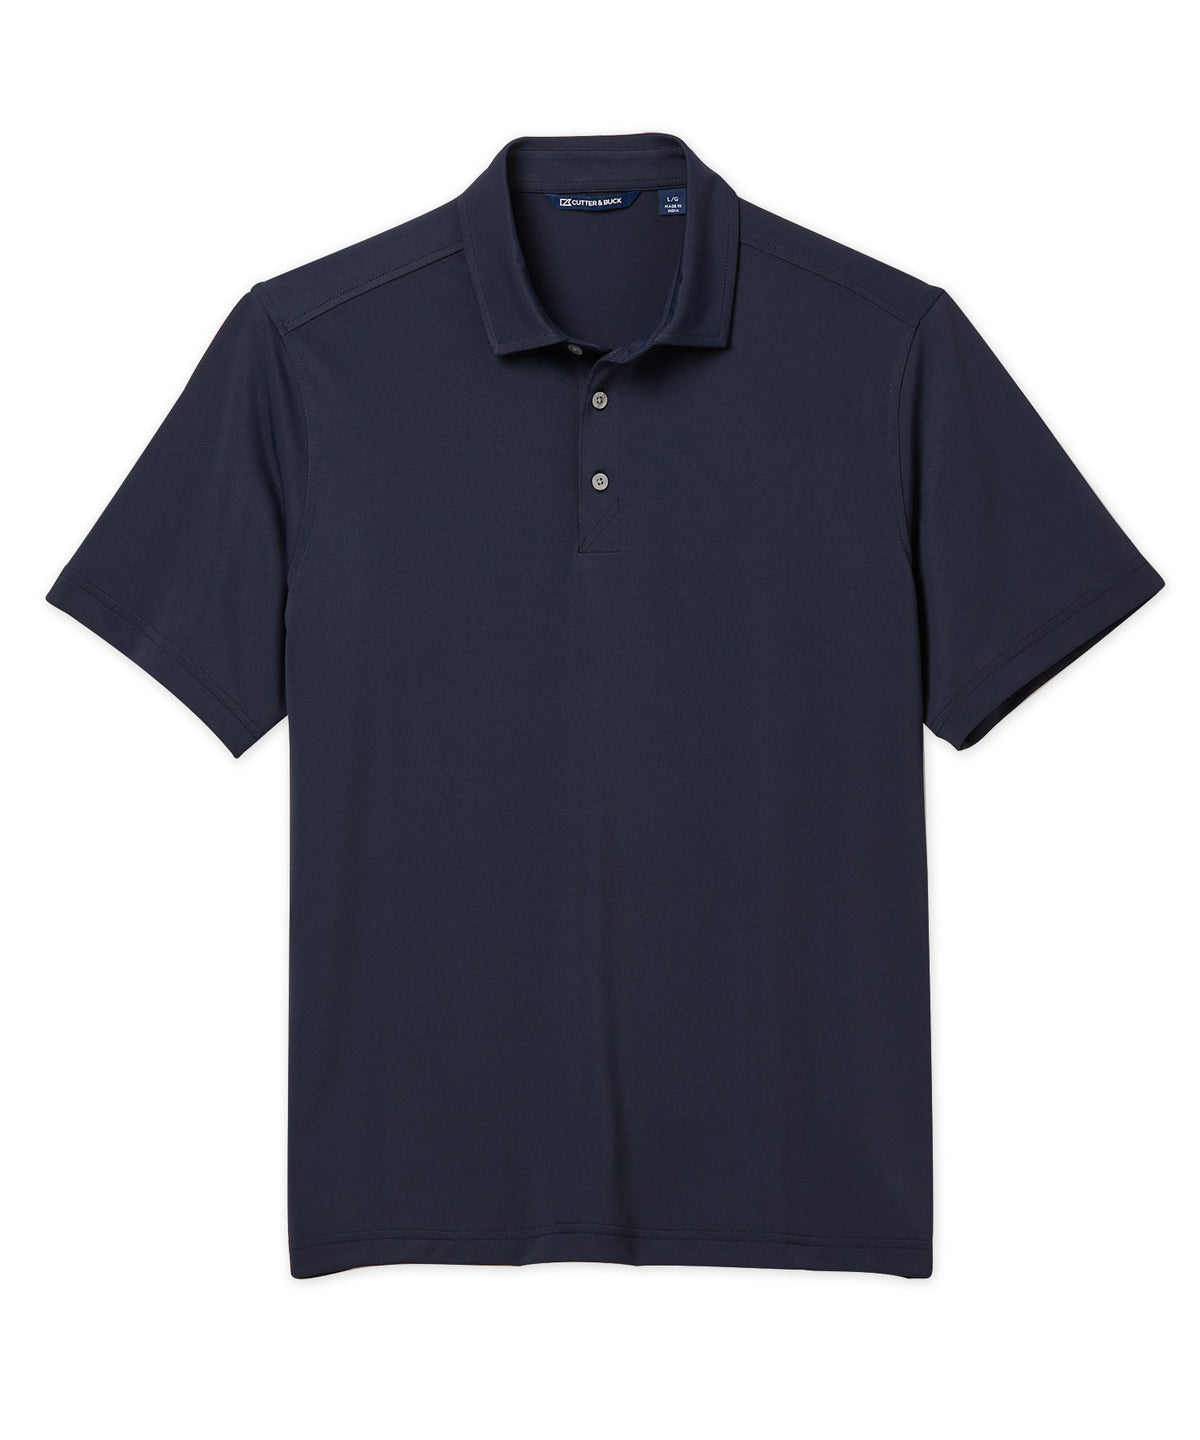 Cutter & Buck Short Sleeve Virtue Eco Pique Recycled Polo, Men's Big & Tall